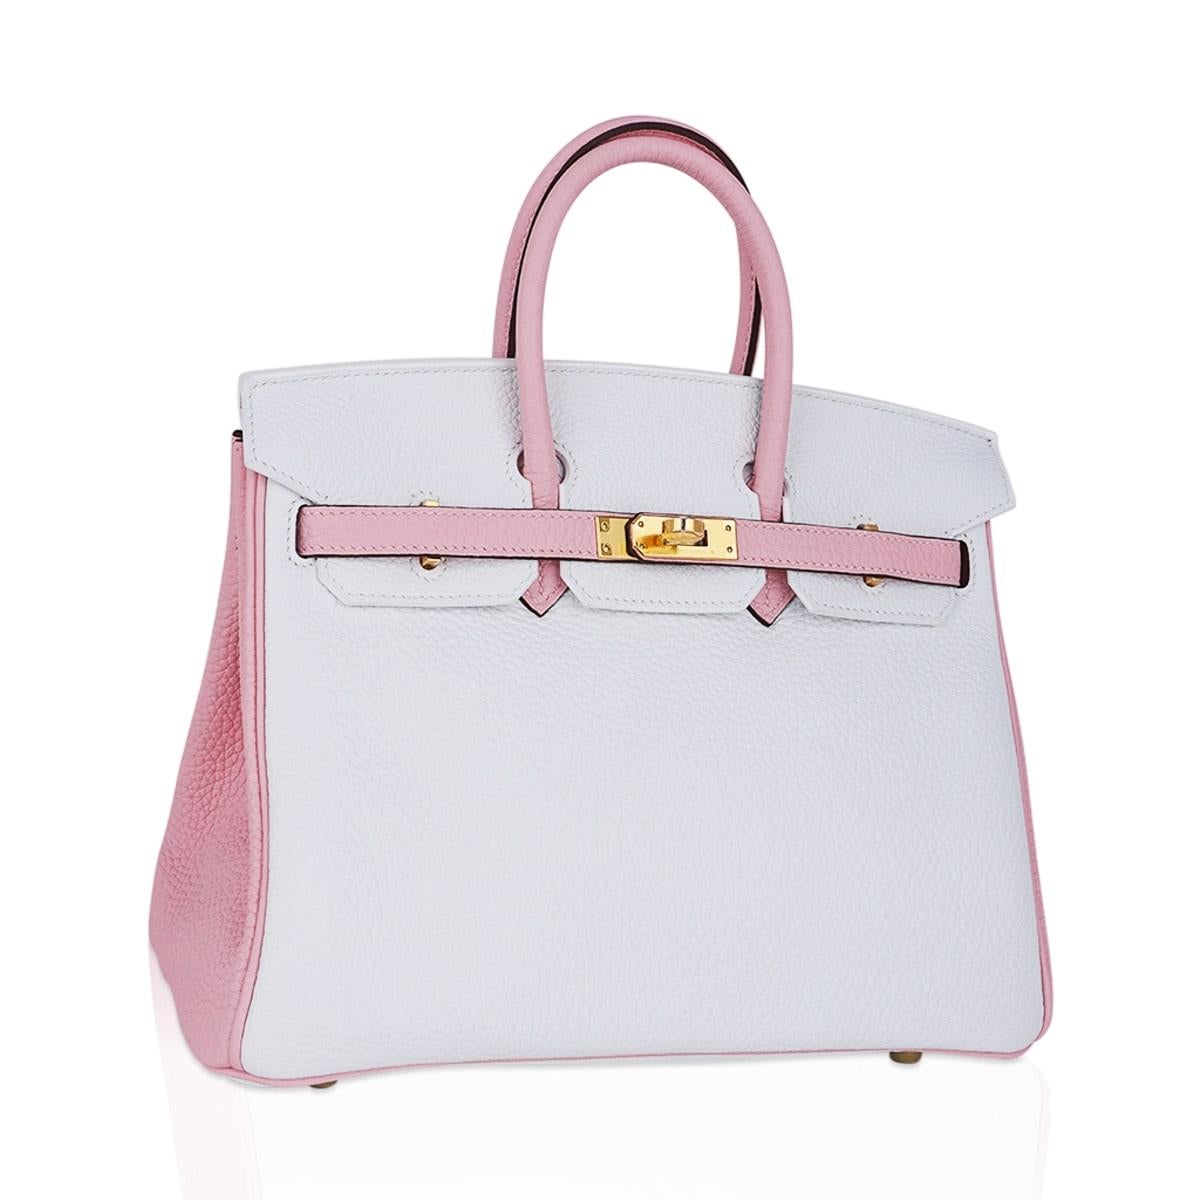 Mightychic offers an Hermes Birkin HSS 25 bi-color bag featured in White and Rose Sakura.
This gorgeous special order Birkin bag offers two of the most rare leather colours.
Lush with Gold hardware.
Clemence leather.
Comes with the lock, keys,